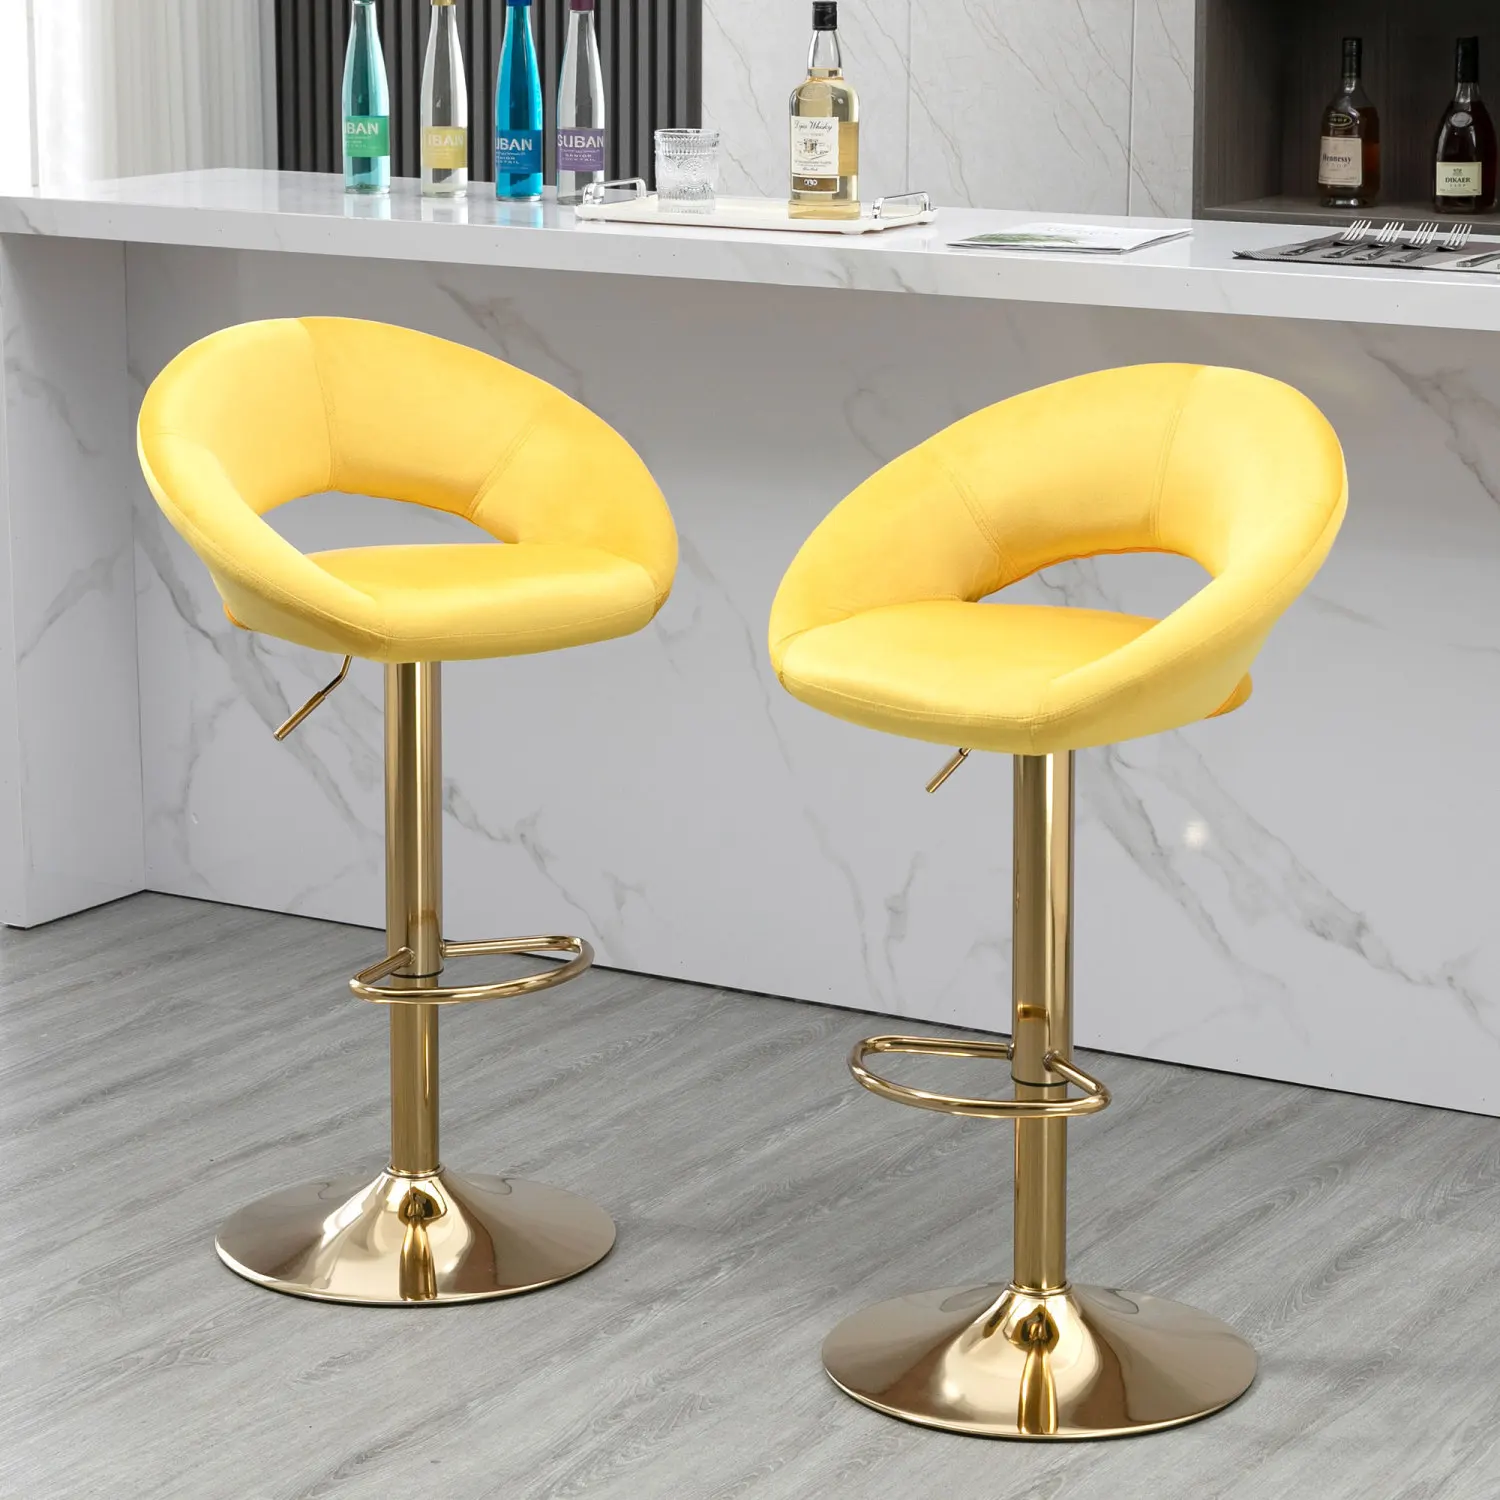 

Set of 2 Modern Yellow Velvet Adjustable Swivel Bar Stools, Counter Height Bar Chair, Stylish Dining Chairs